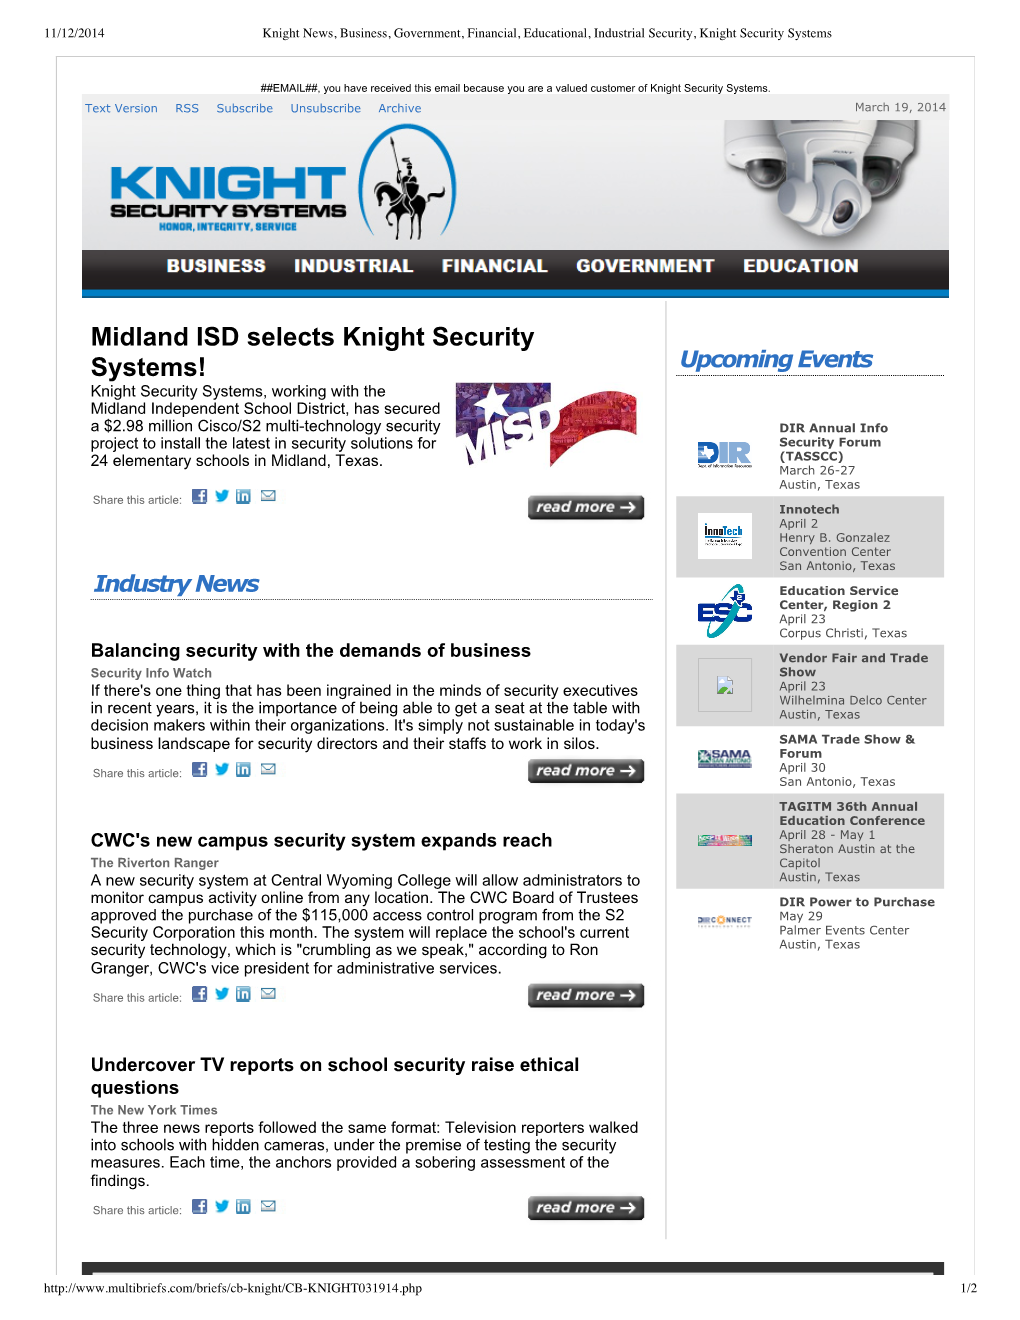 Midland ISD Selects Knight Security Systems!